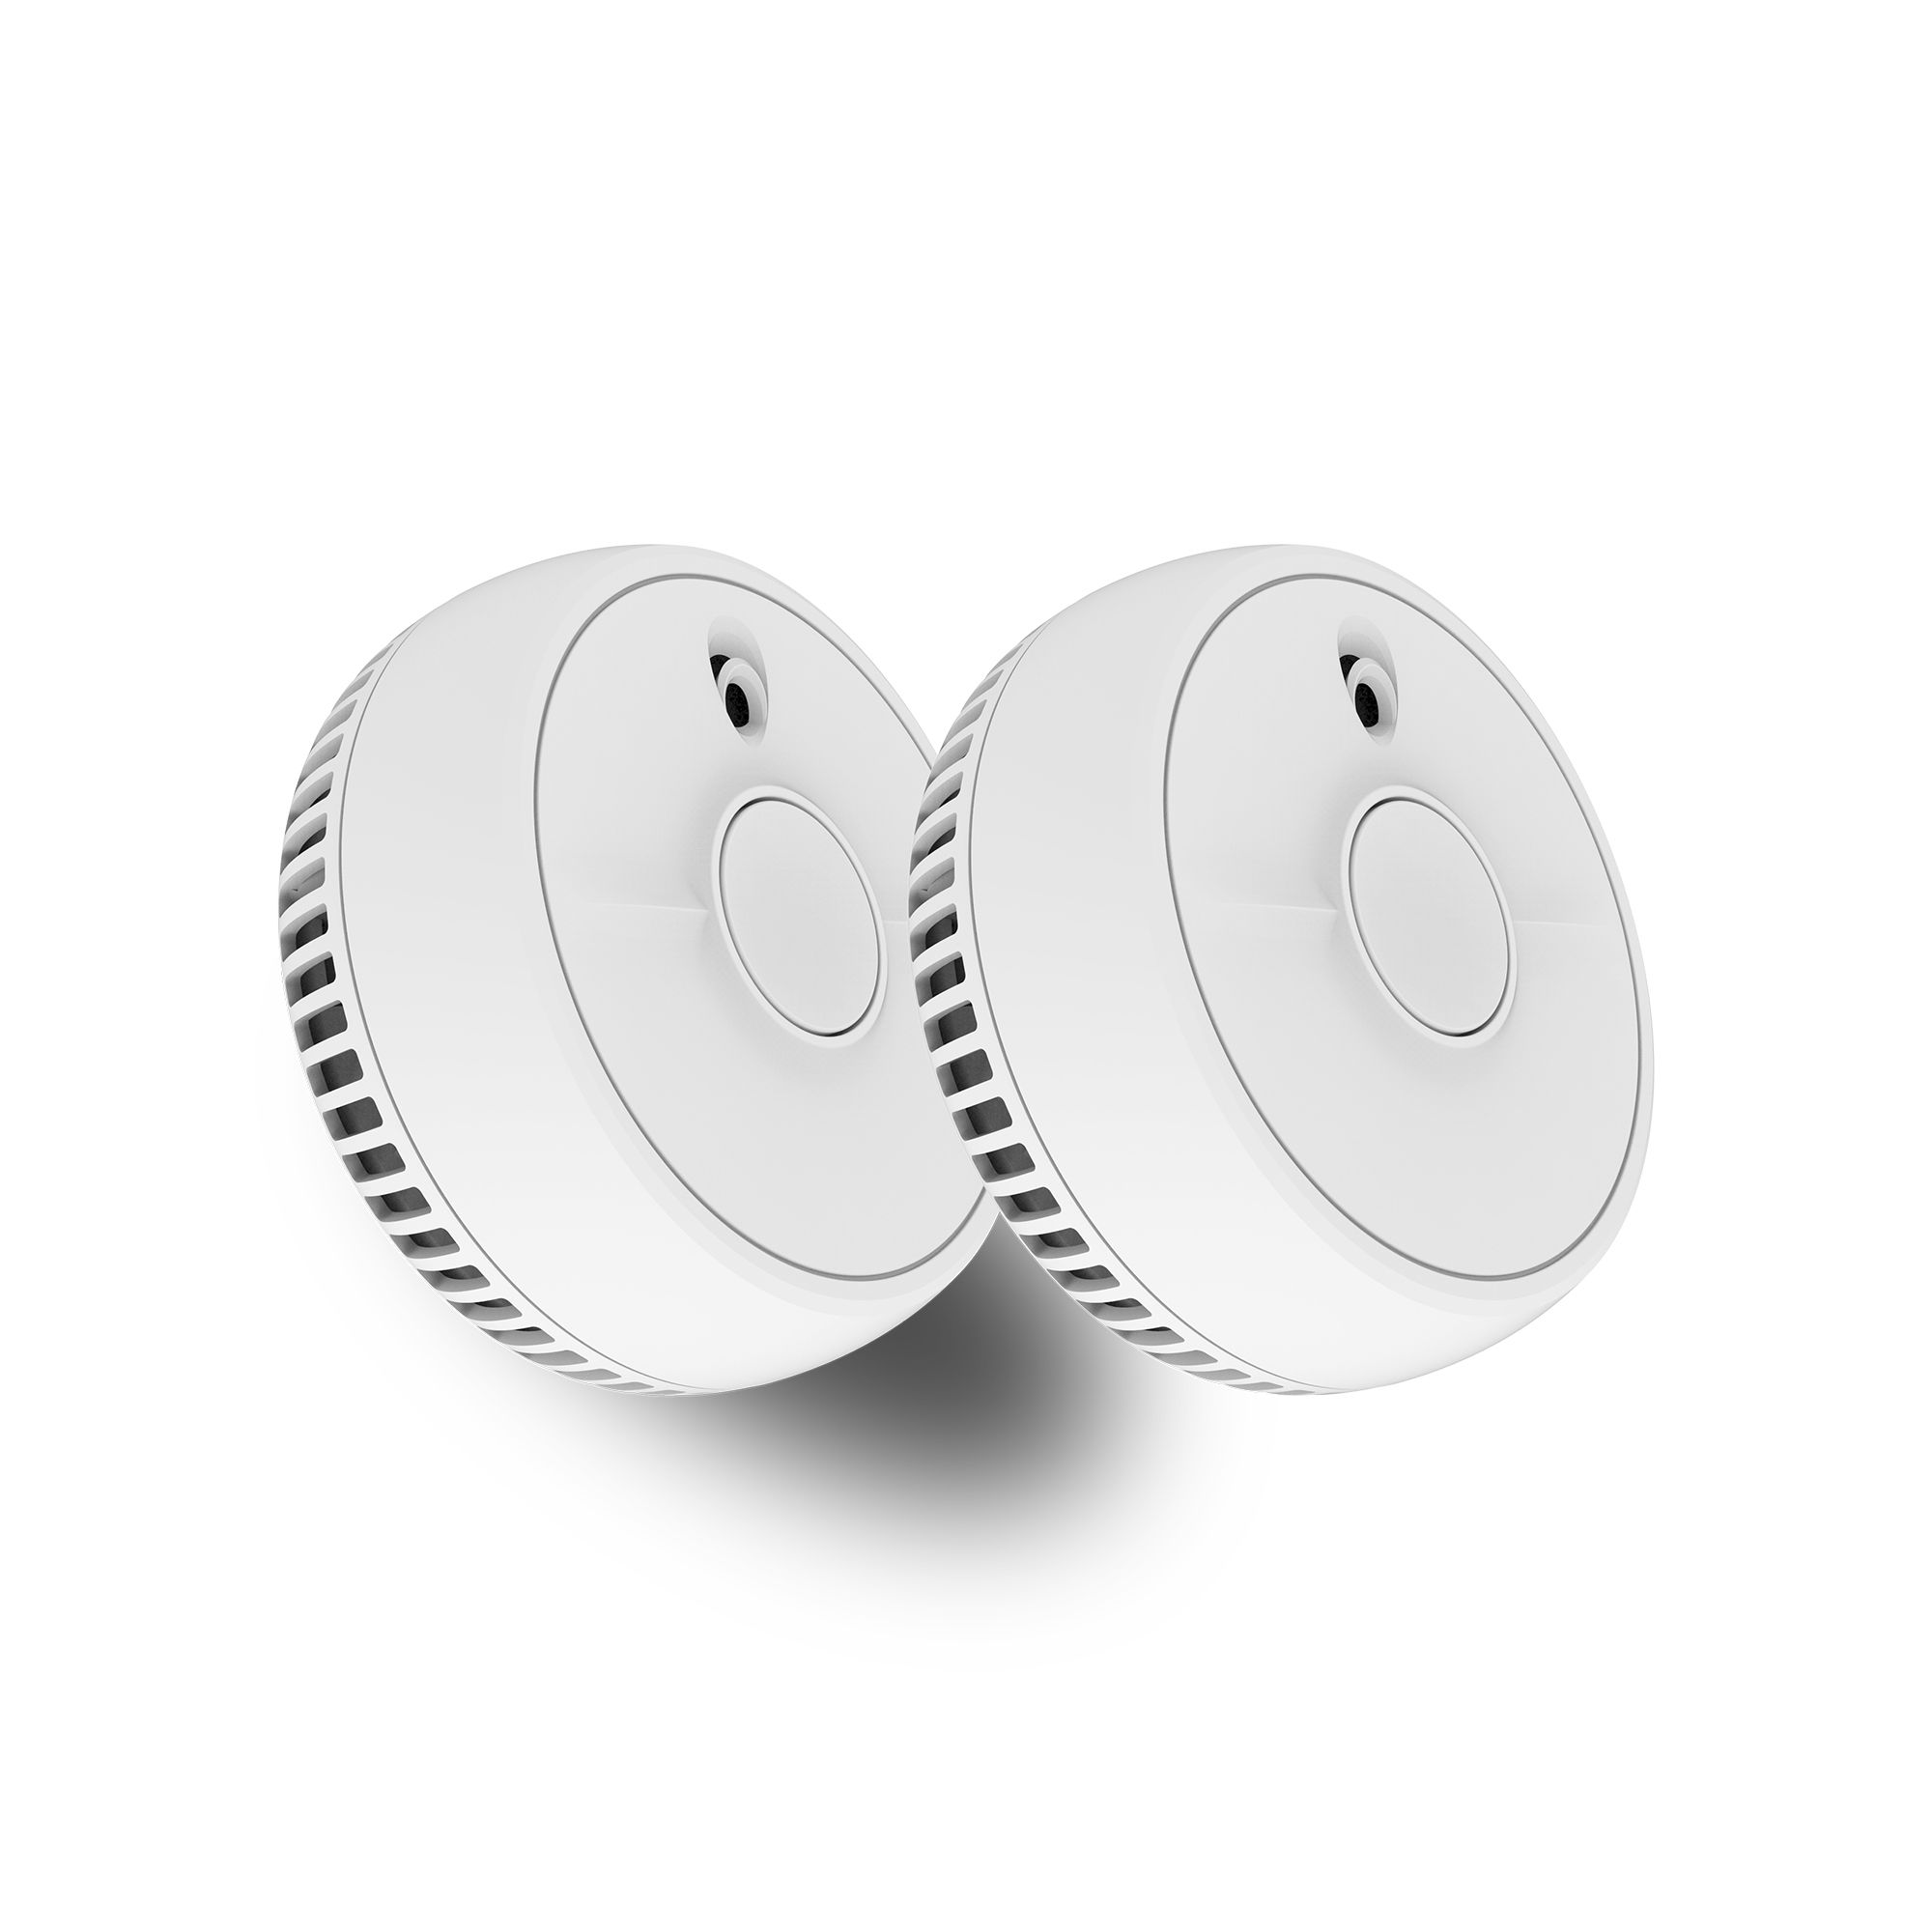 FireAngel Toast Proof SB1-TP-R Standalone Optical Smoke Alarm with 1-year battery, Pack of 2